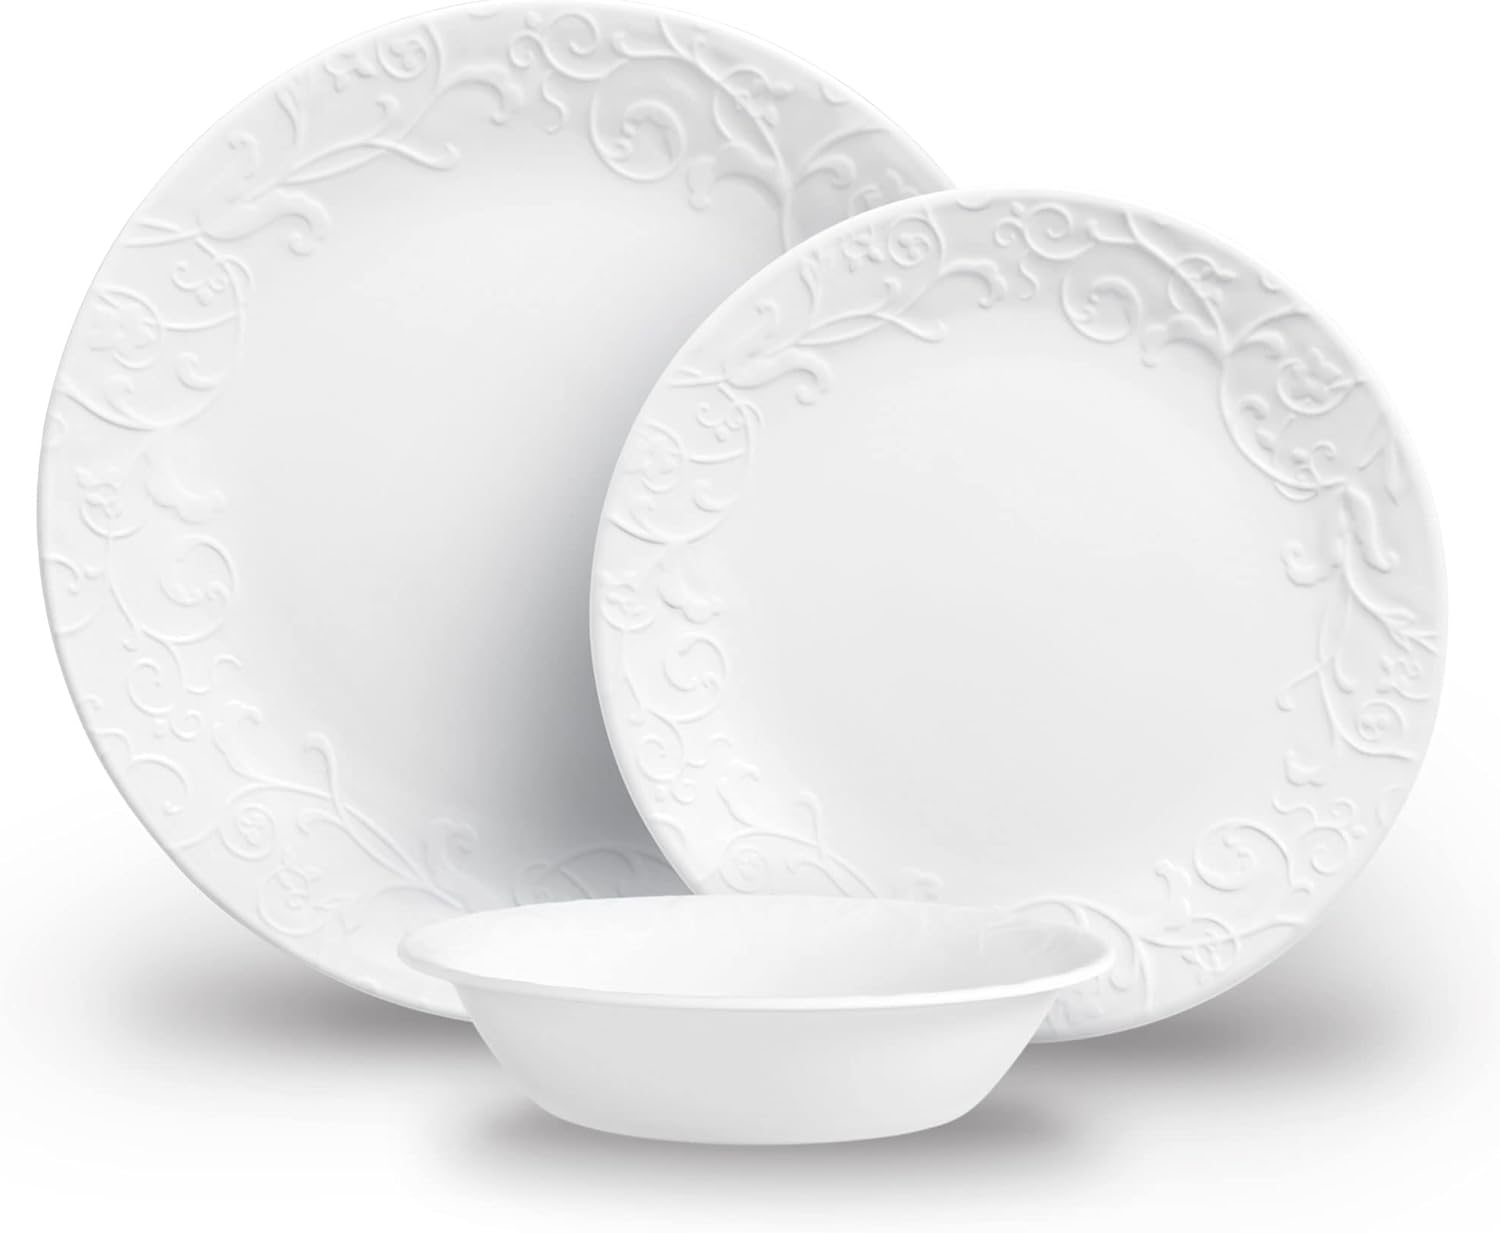 https://bigbigmart.com/wp-content/uploads/2023/09/Corelle-Dinnerware-Set-12pc-Set-Bella-Faenza-Dinner-Set-for-4-Includes-4-x-Plates-Side-Plates-Bowls-3-X-More-Durable-Half-The-Space-Weight-of-Ceramic-up-to-80-Recycled-Glass-1146912.jpg